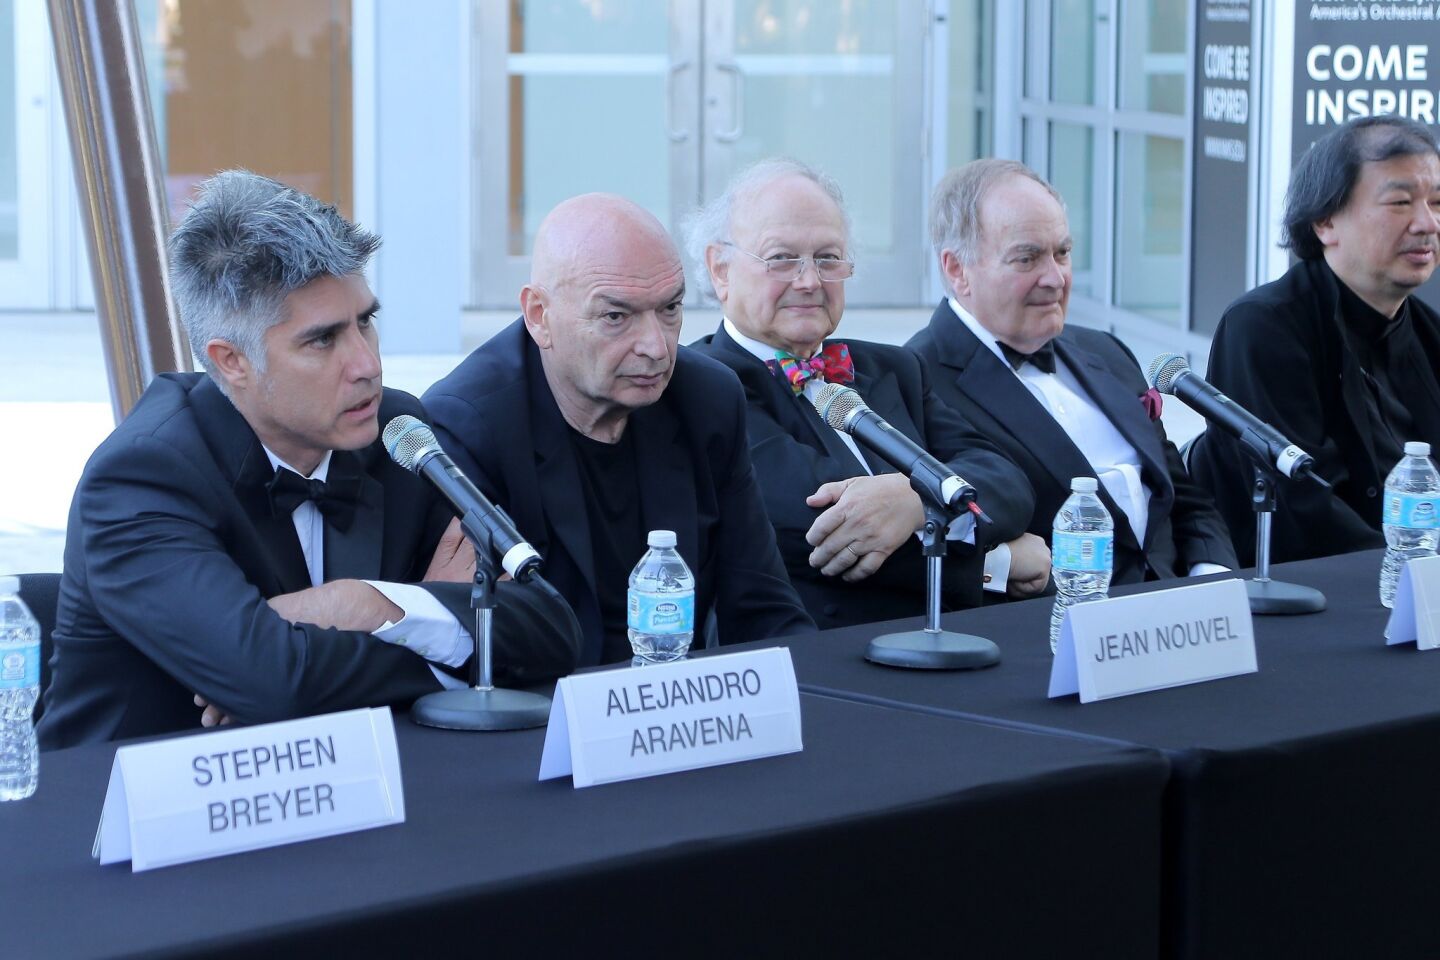 Chilean architect Alejandro Aravena at the Pritzker Prize ceremony in Miami Beach, with (left to right) a very high-profile panel consisting of Jean Nouvel, Glenn Murcutt, Lord Peter Palumbo and Shigeru Ban.